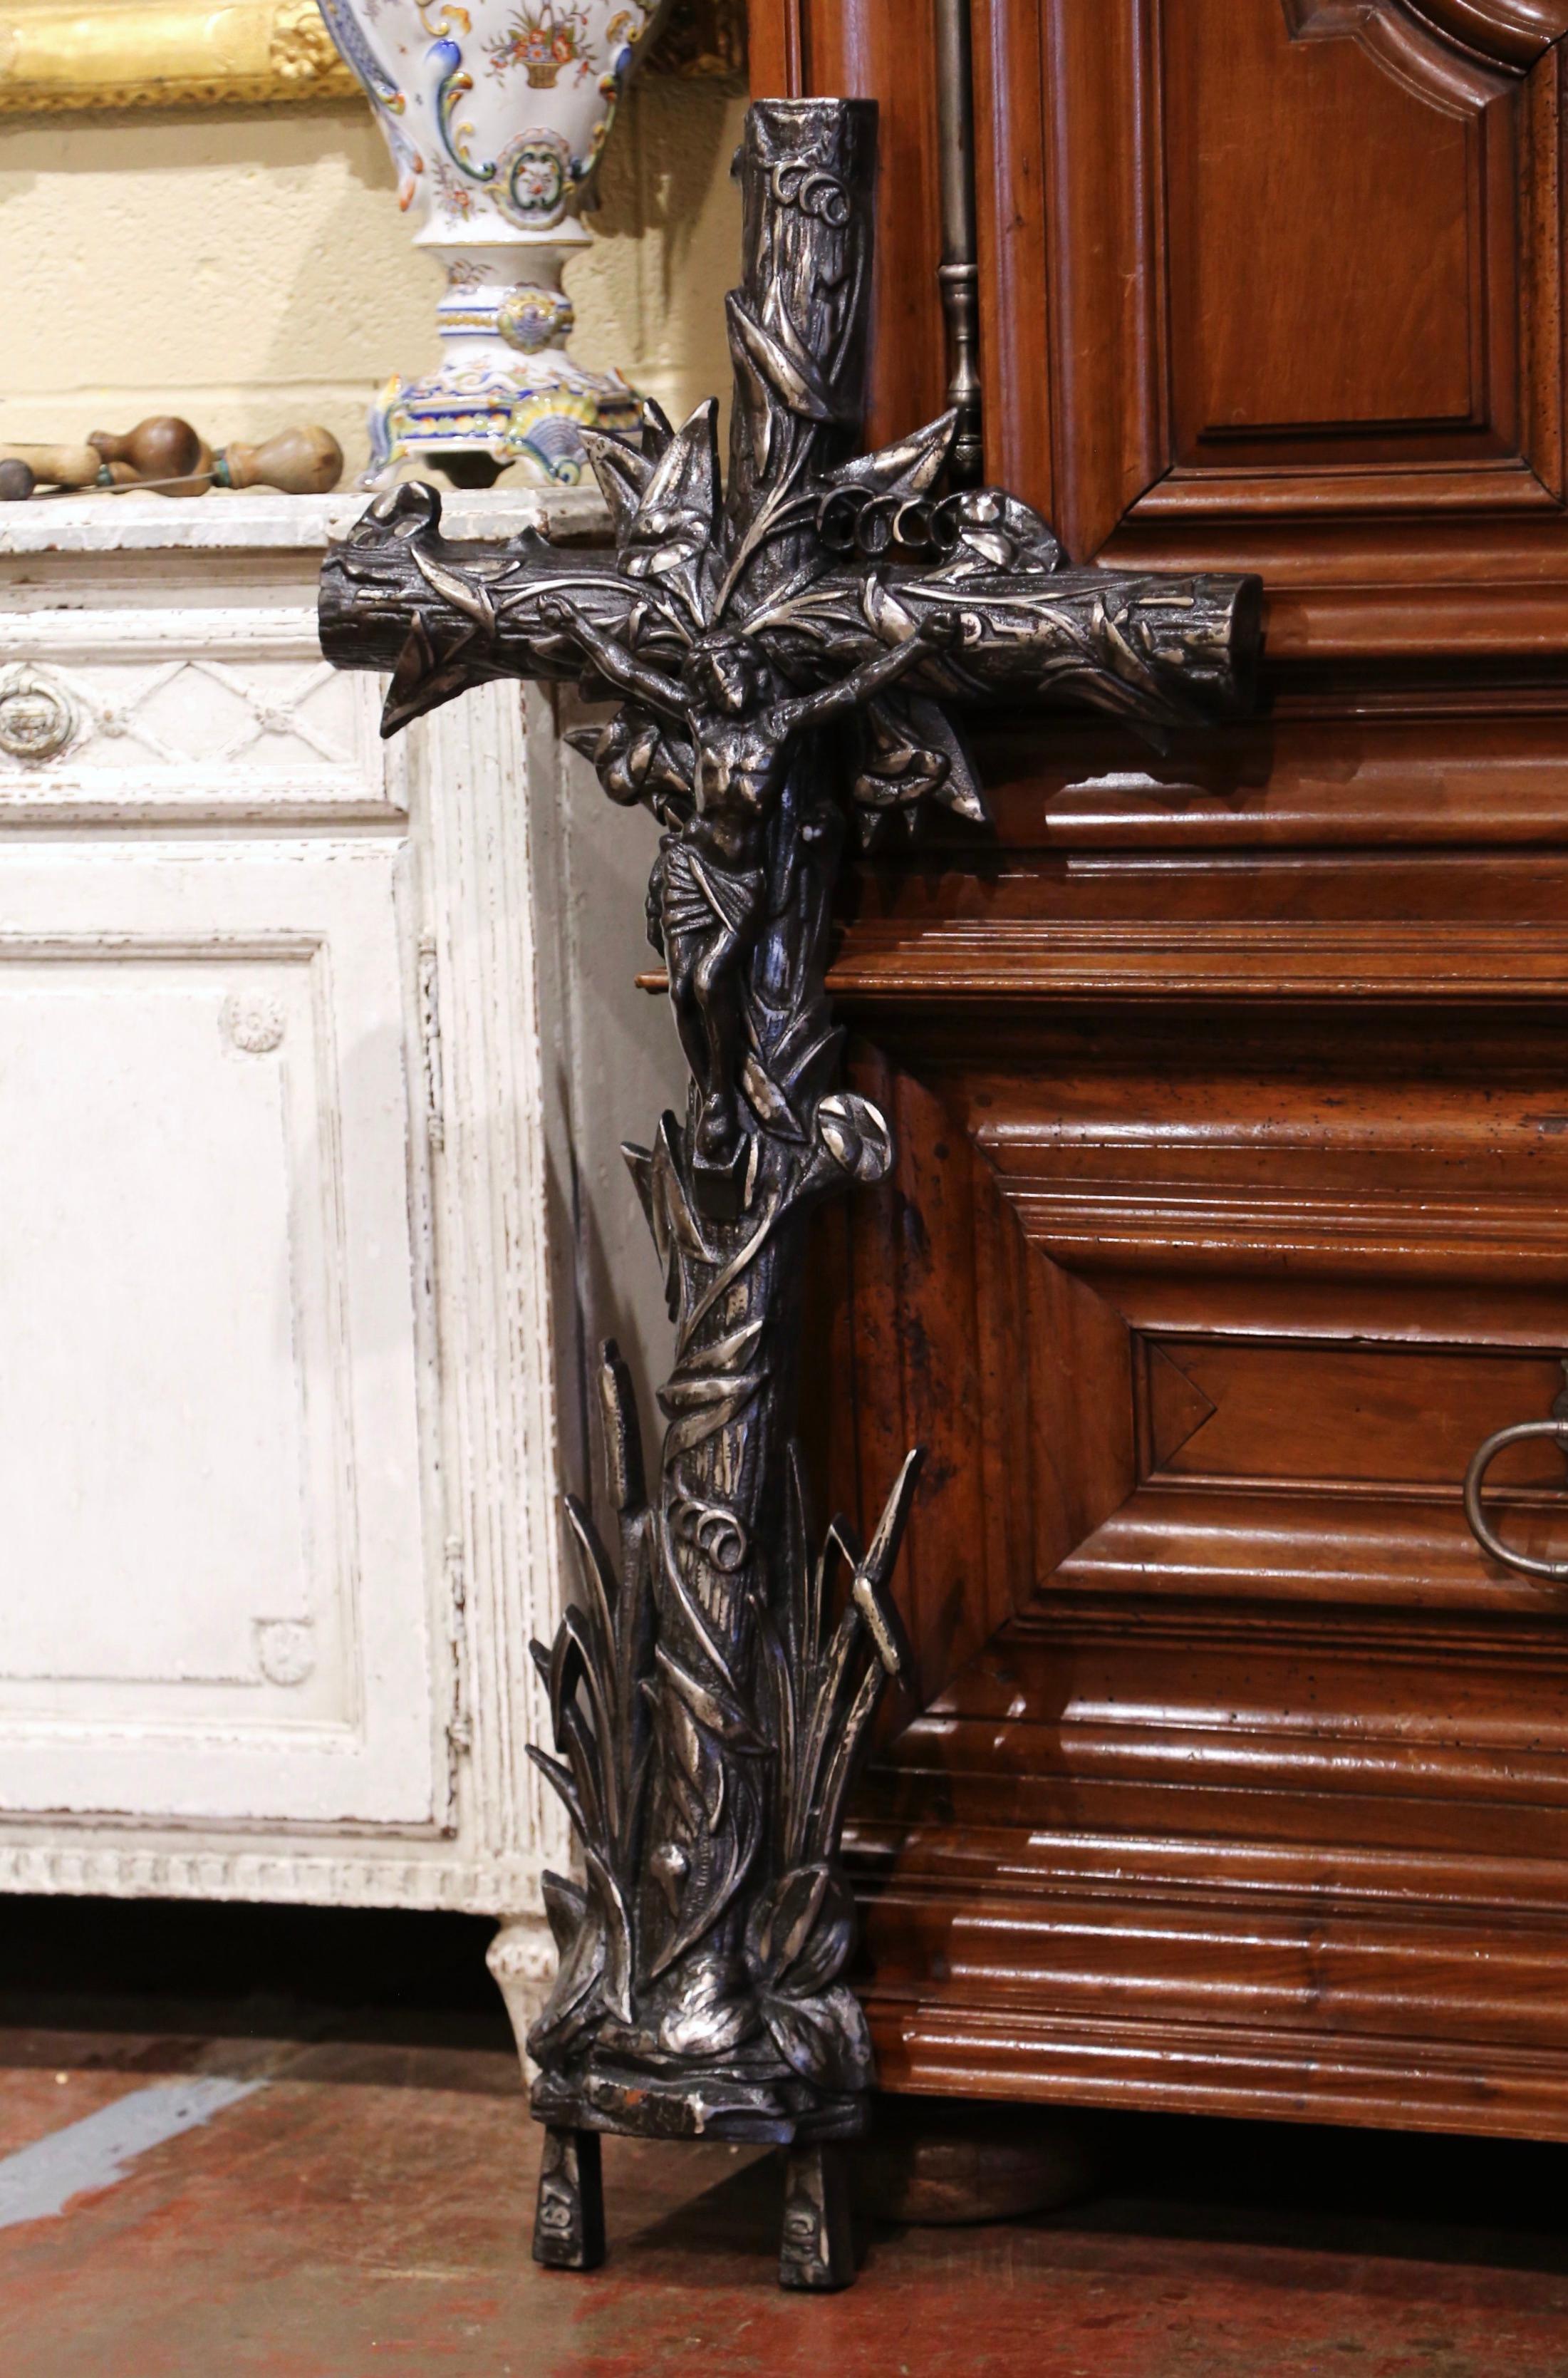 This beautiful, antique cross was crafted in France, circa 1870. The large iron crucifix rests on an oval base, and features our Lord nailed on the cross and is decorated with vine and reed motifs in high relief all throughout. The Classic religious